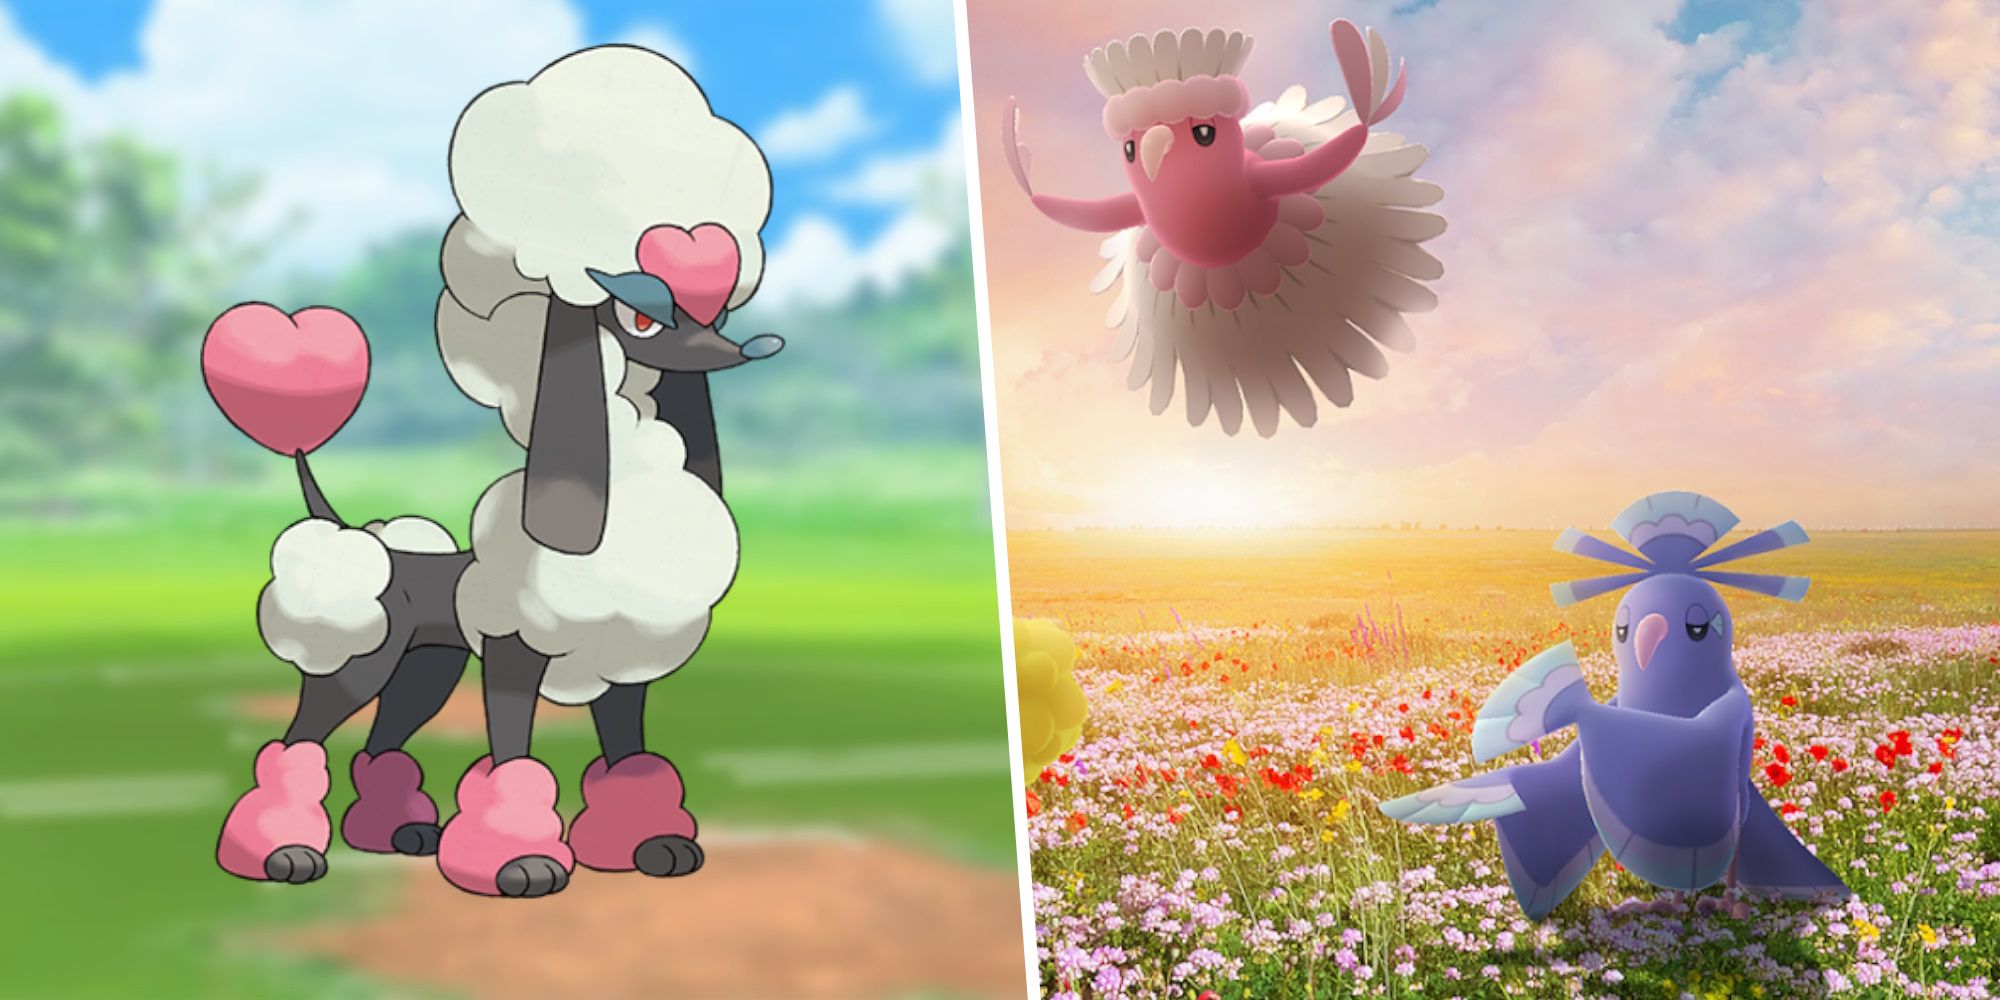 Image of Heart Trim Furfrou split with an image of two Oricorio